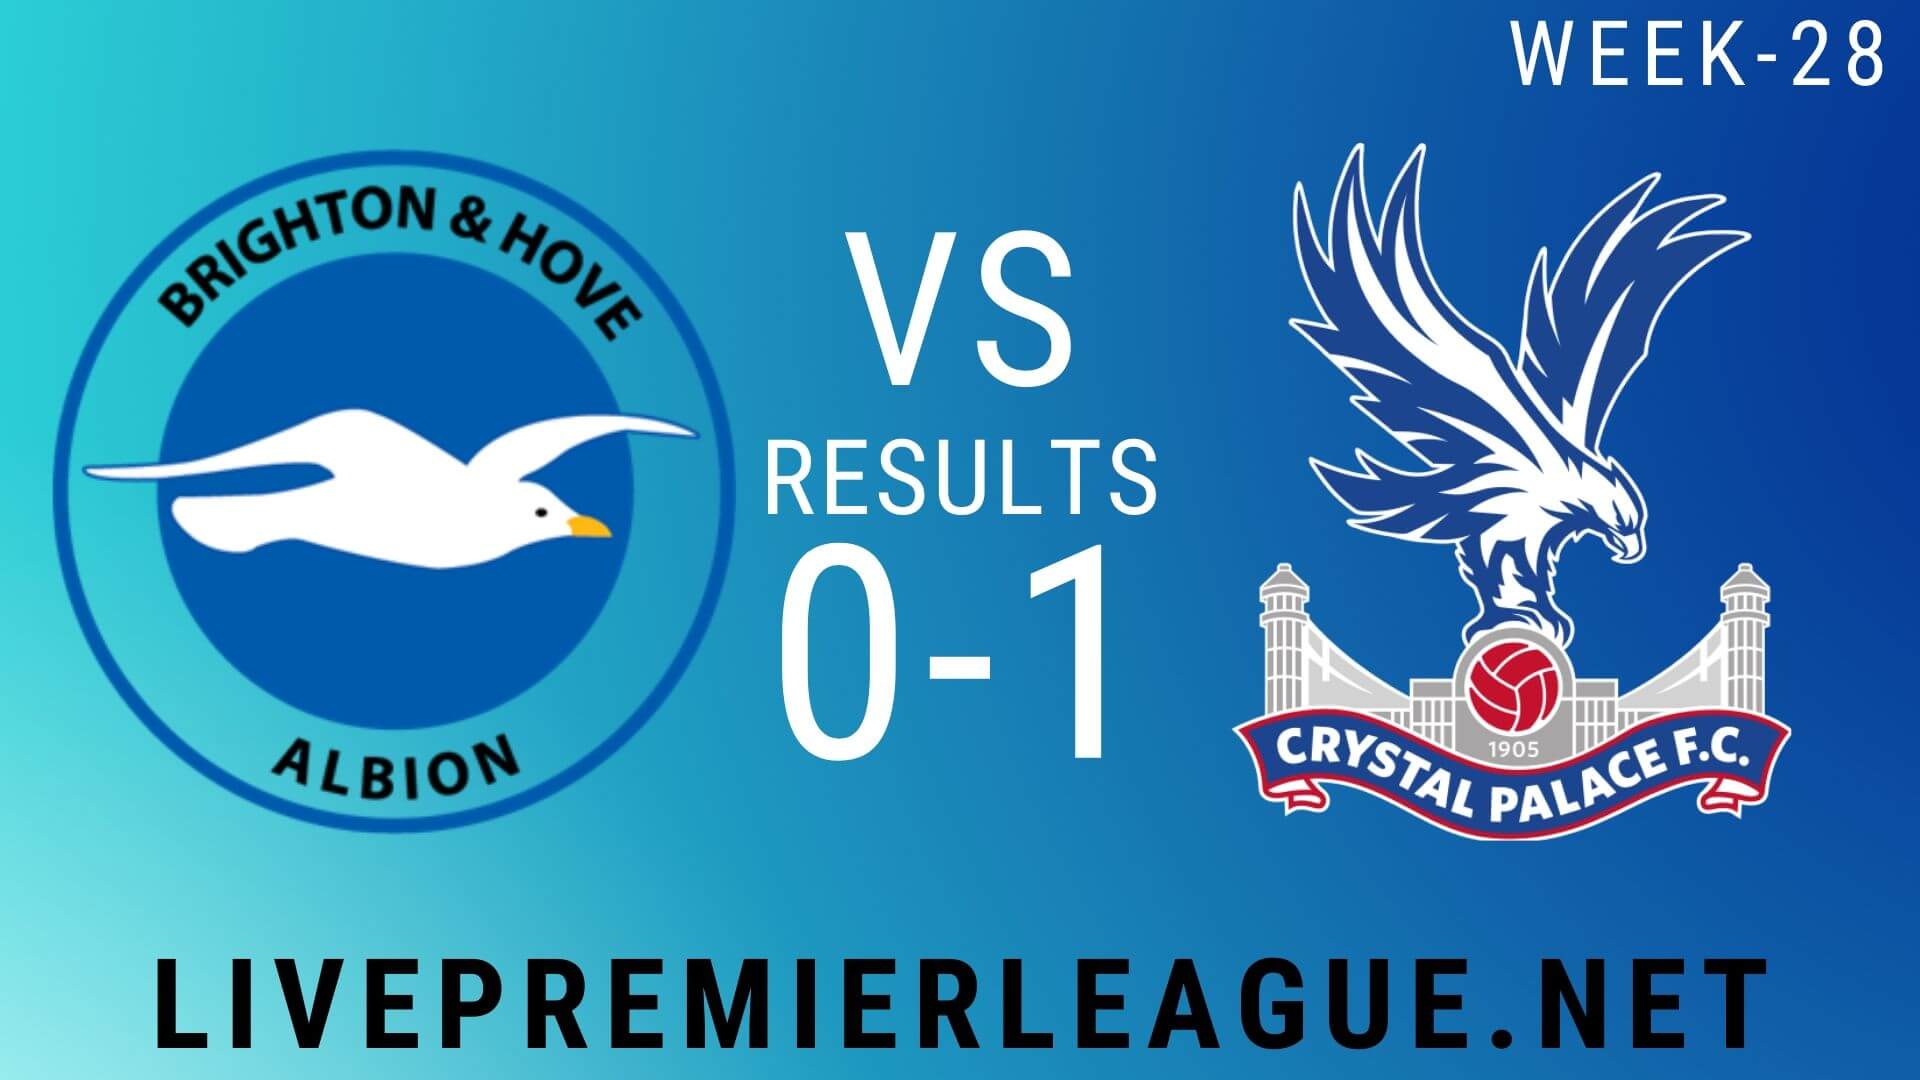 Brighton and Hove Albion Vs Crystal Palace | Week 28 Results 2020